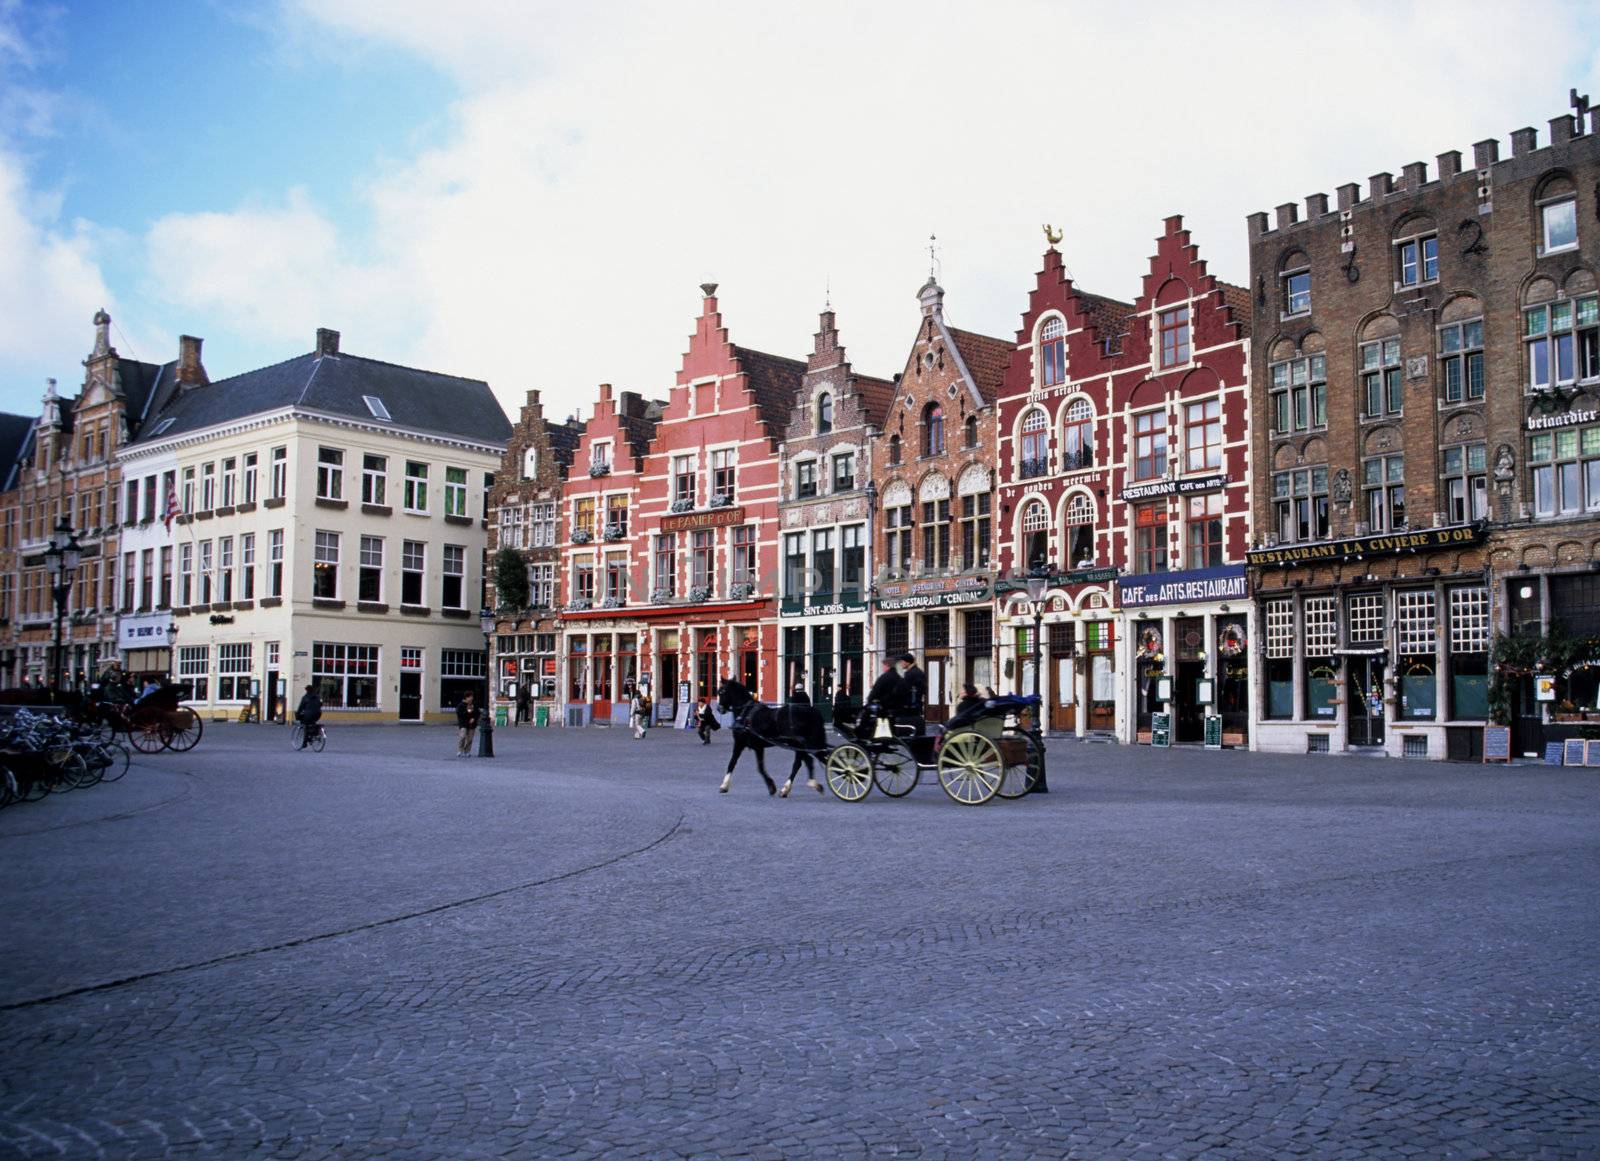 Colourful buildings of Brugges, Belgium with a horse drawn carriage.